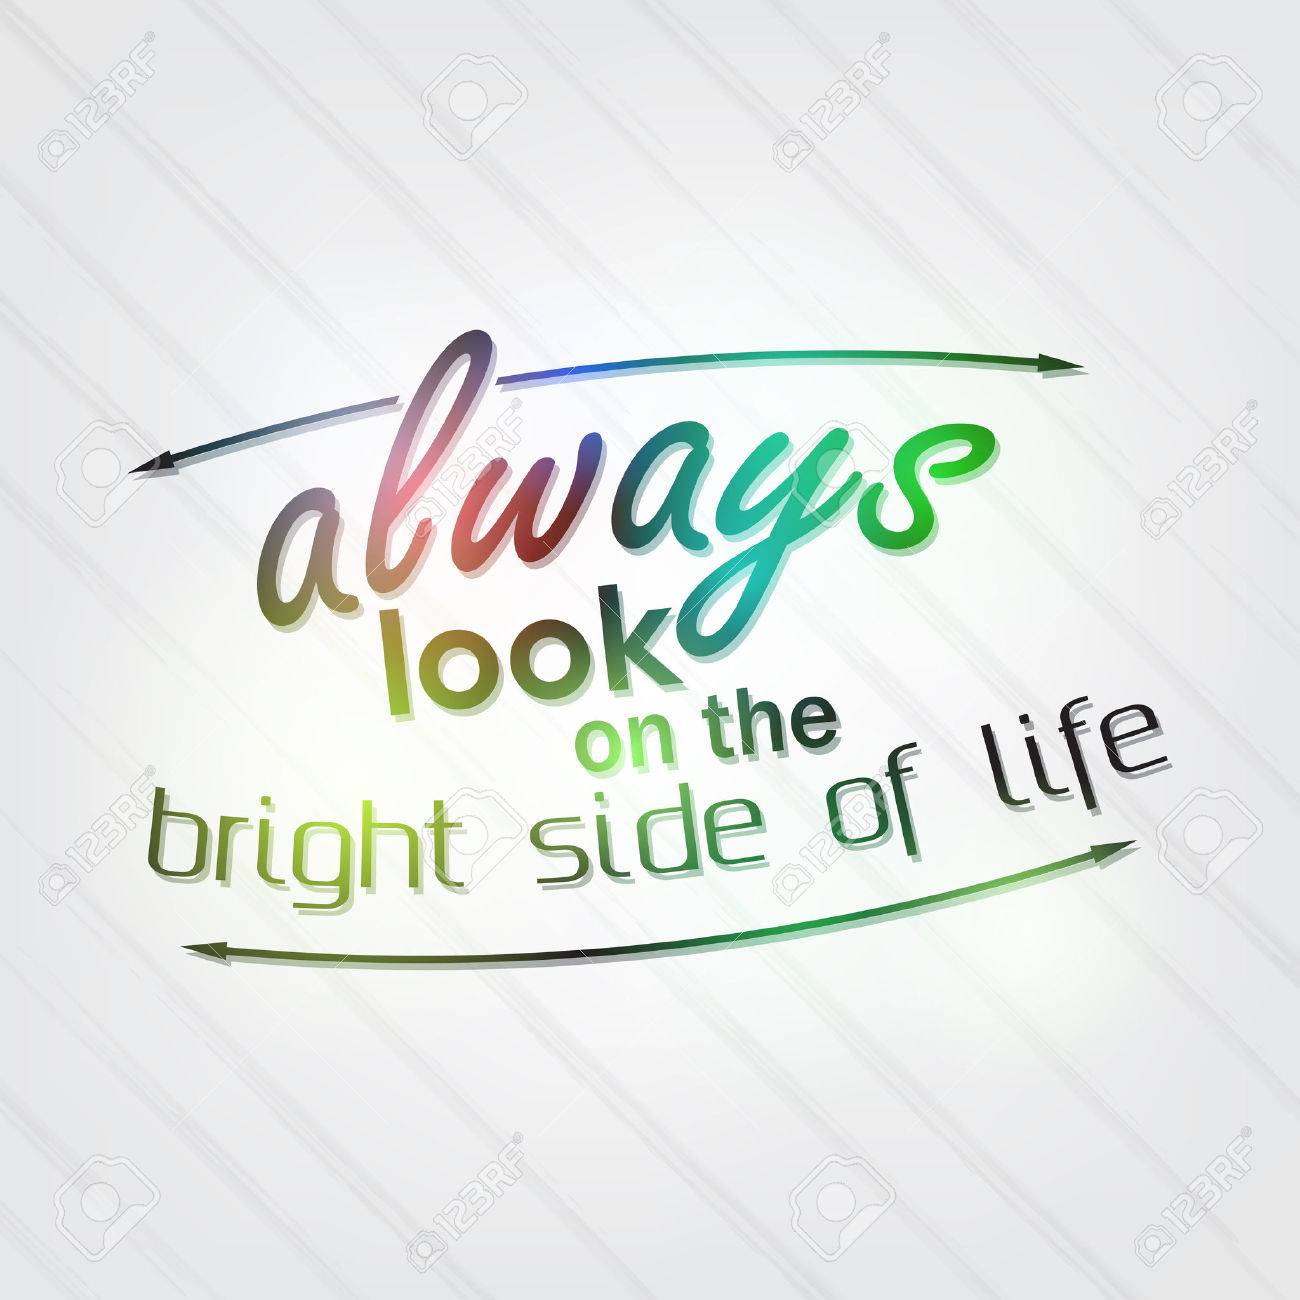 Always Look On The Bright Side Of Life Motivational Background